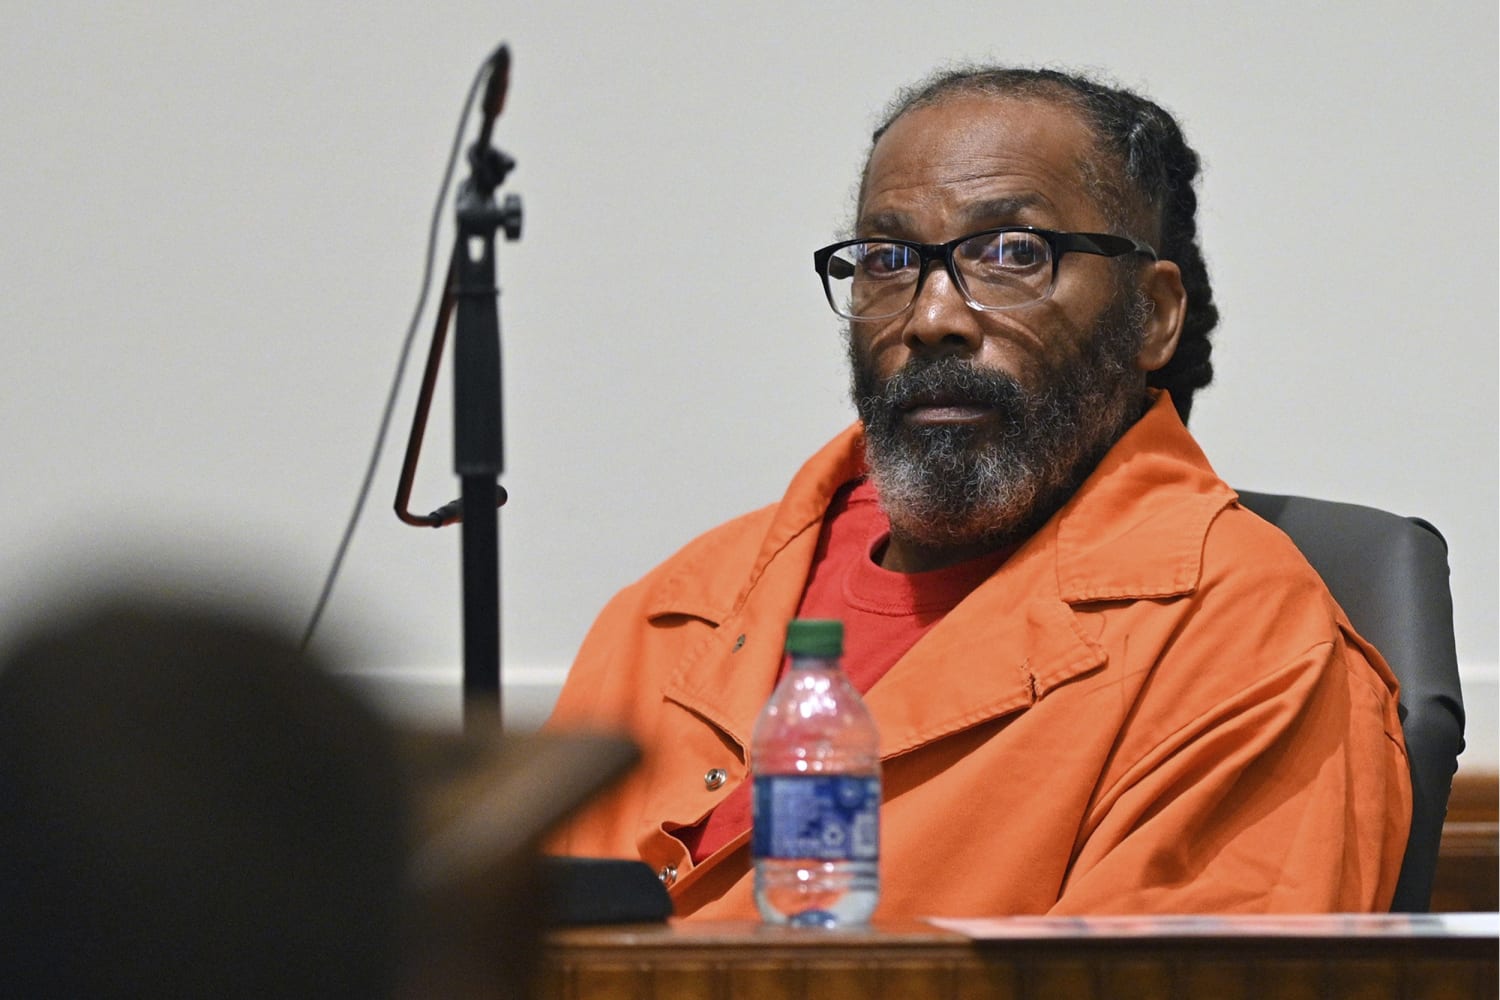 Inmate jailed for 4 decades on triple murder says he’s innocent. The prosecutors agree.